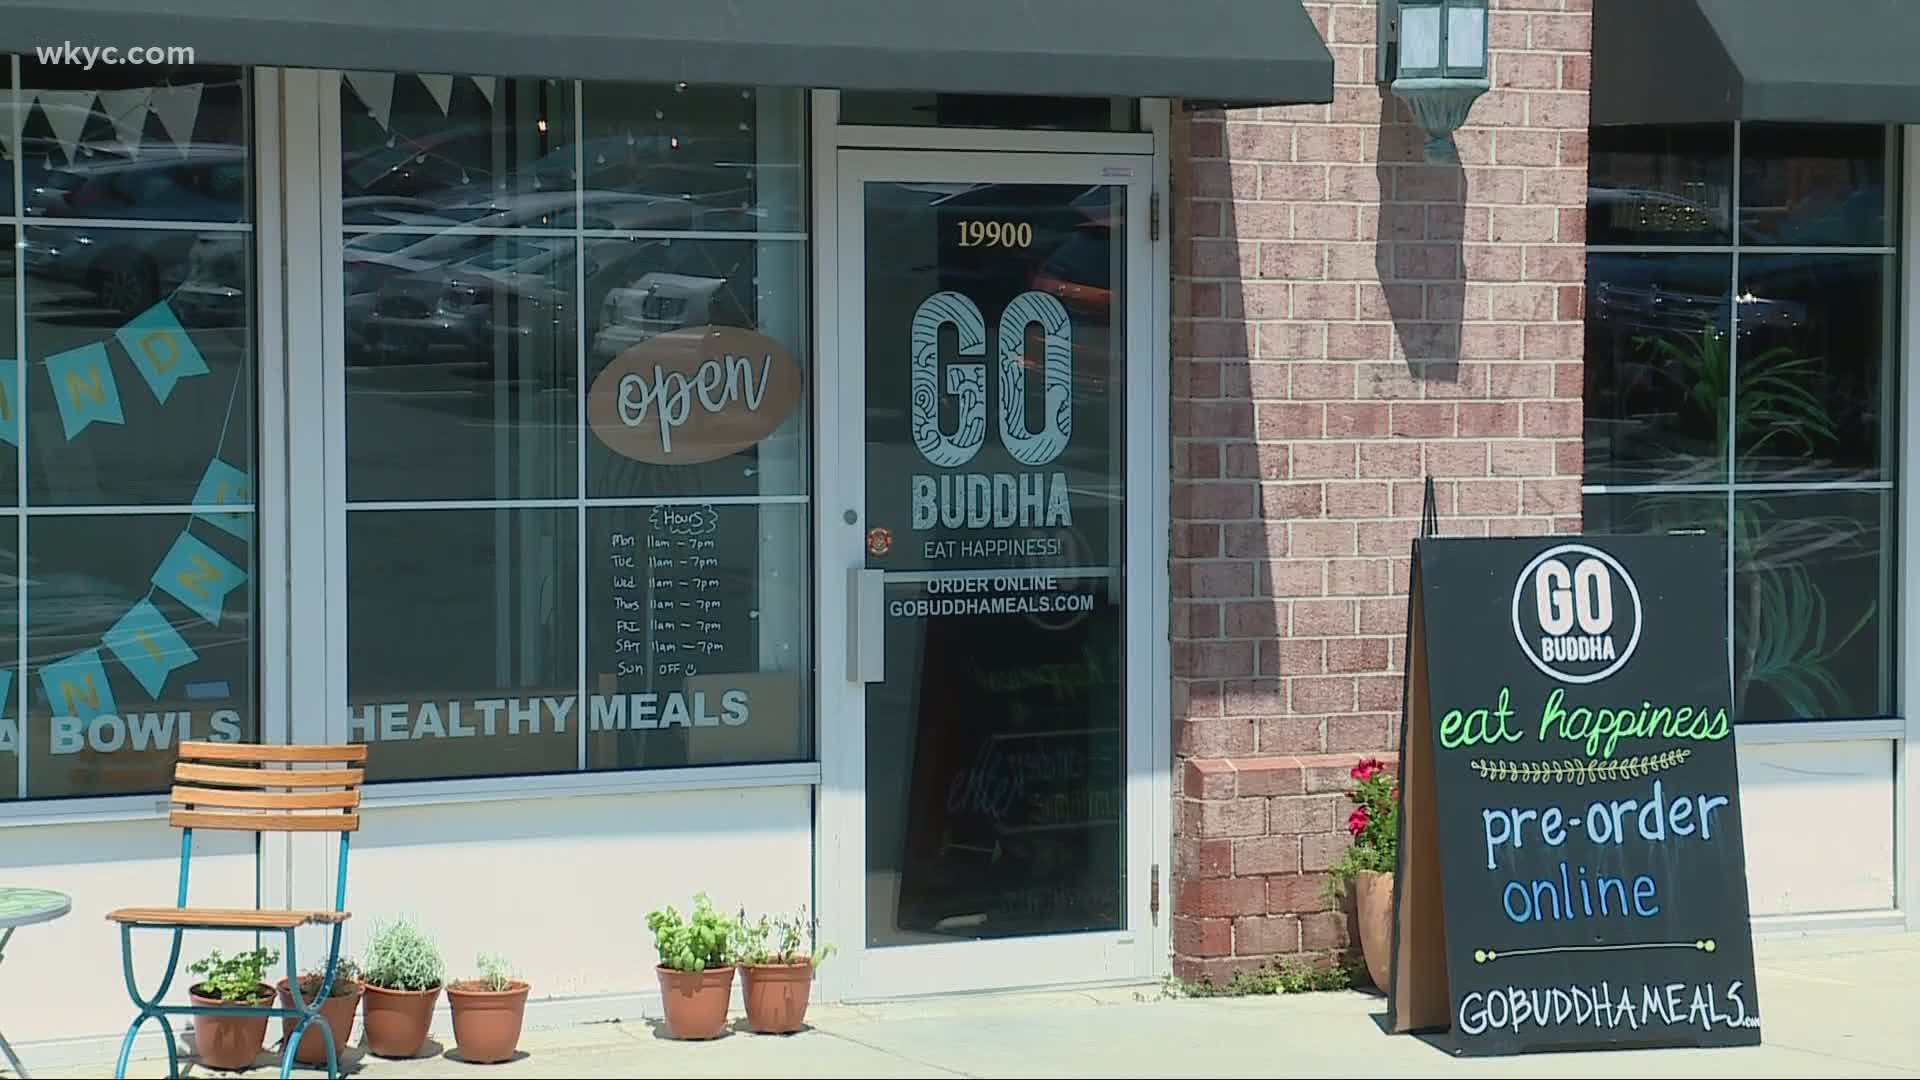 No stranger to challenges, Joshua Ingraham attracts  health conscious customers to Go Buddha, even during a pandemic. Monica Robins reports.